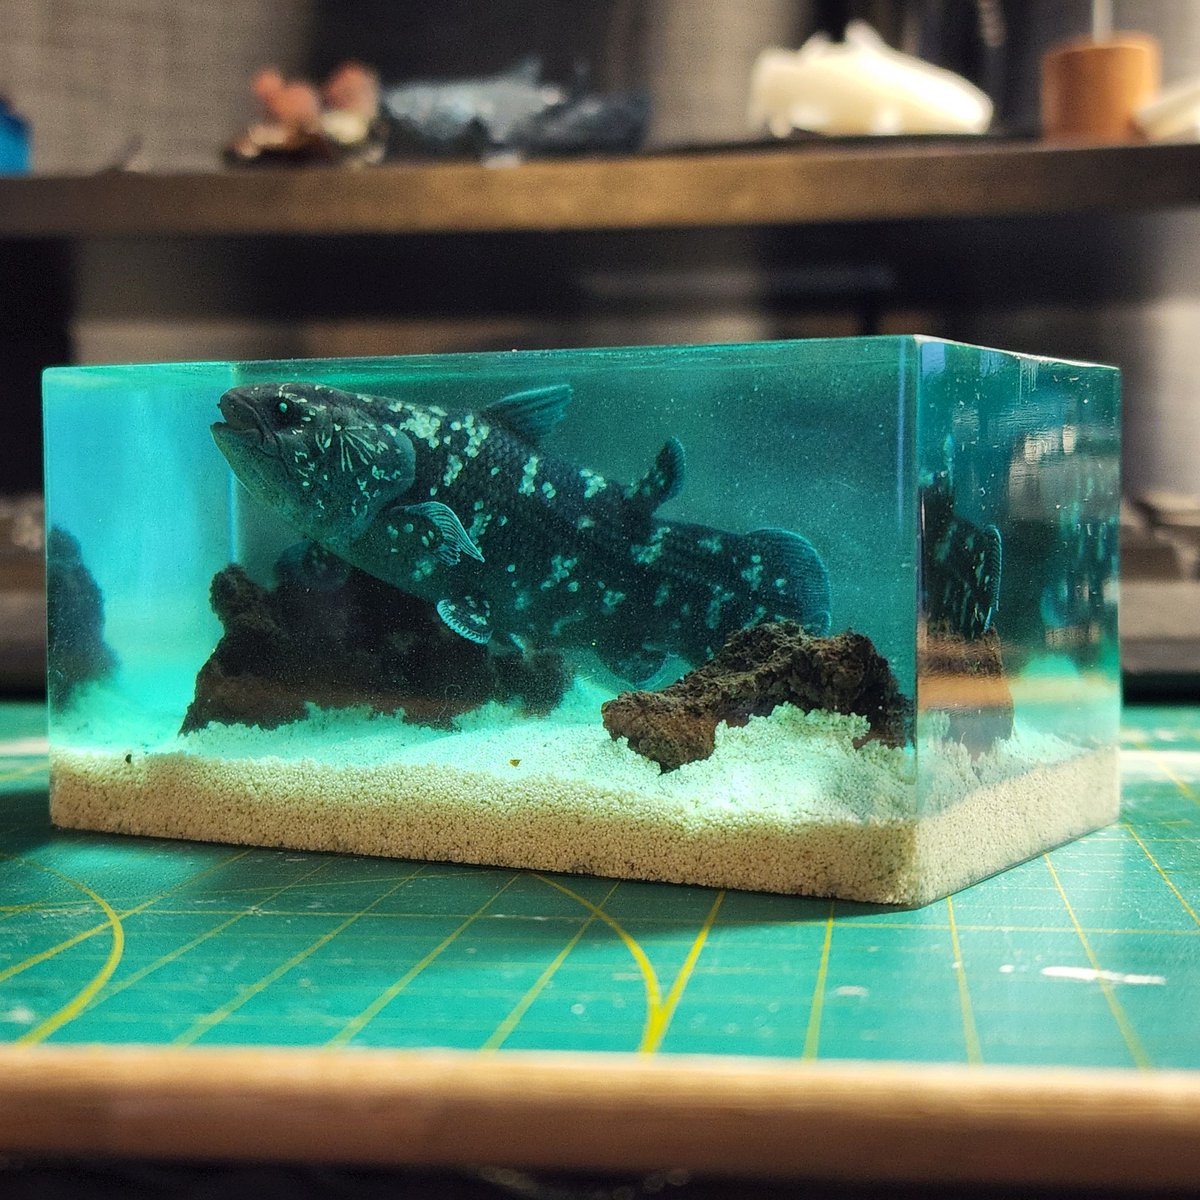 Hello everyone, time for another ✨️give-away✨️, this time a Coelacanth resin diorama! To enter: -Follow me -🔁 this post Drawn 18th August, GL!!